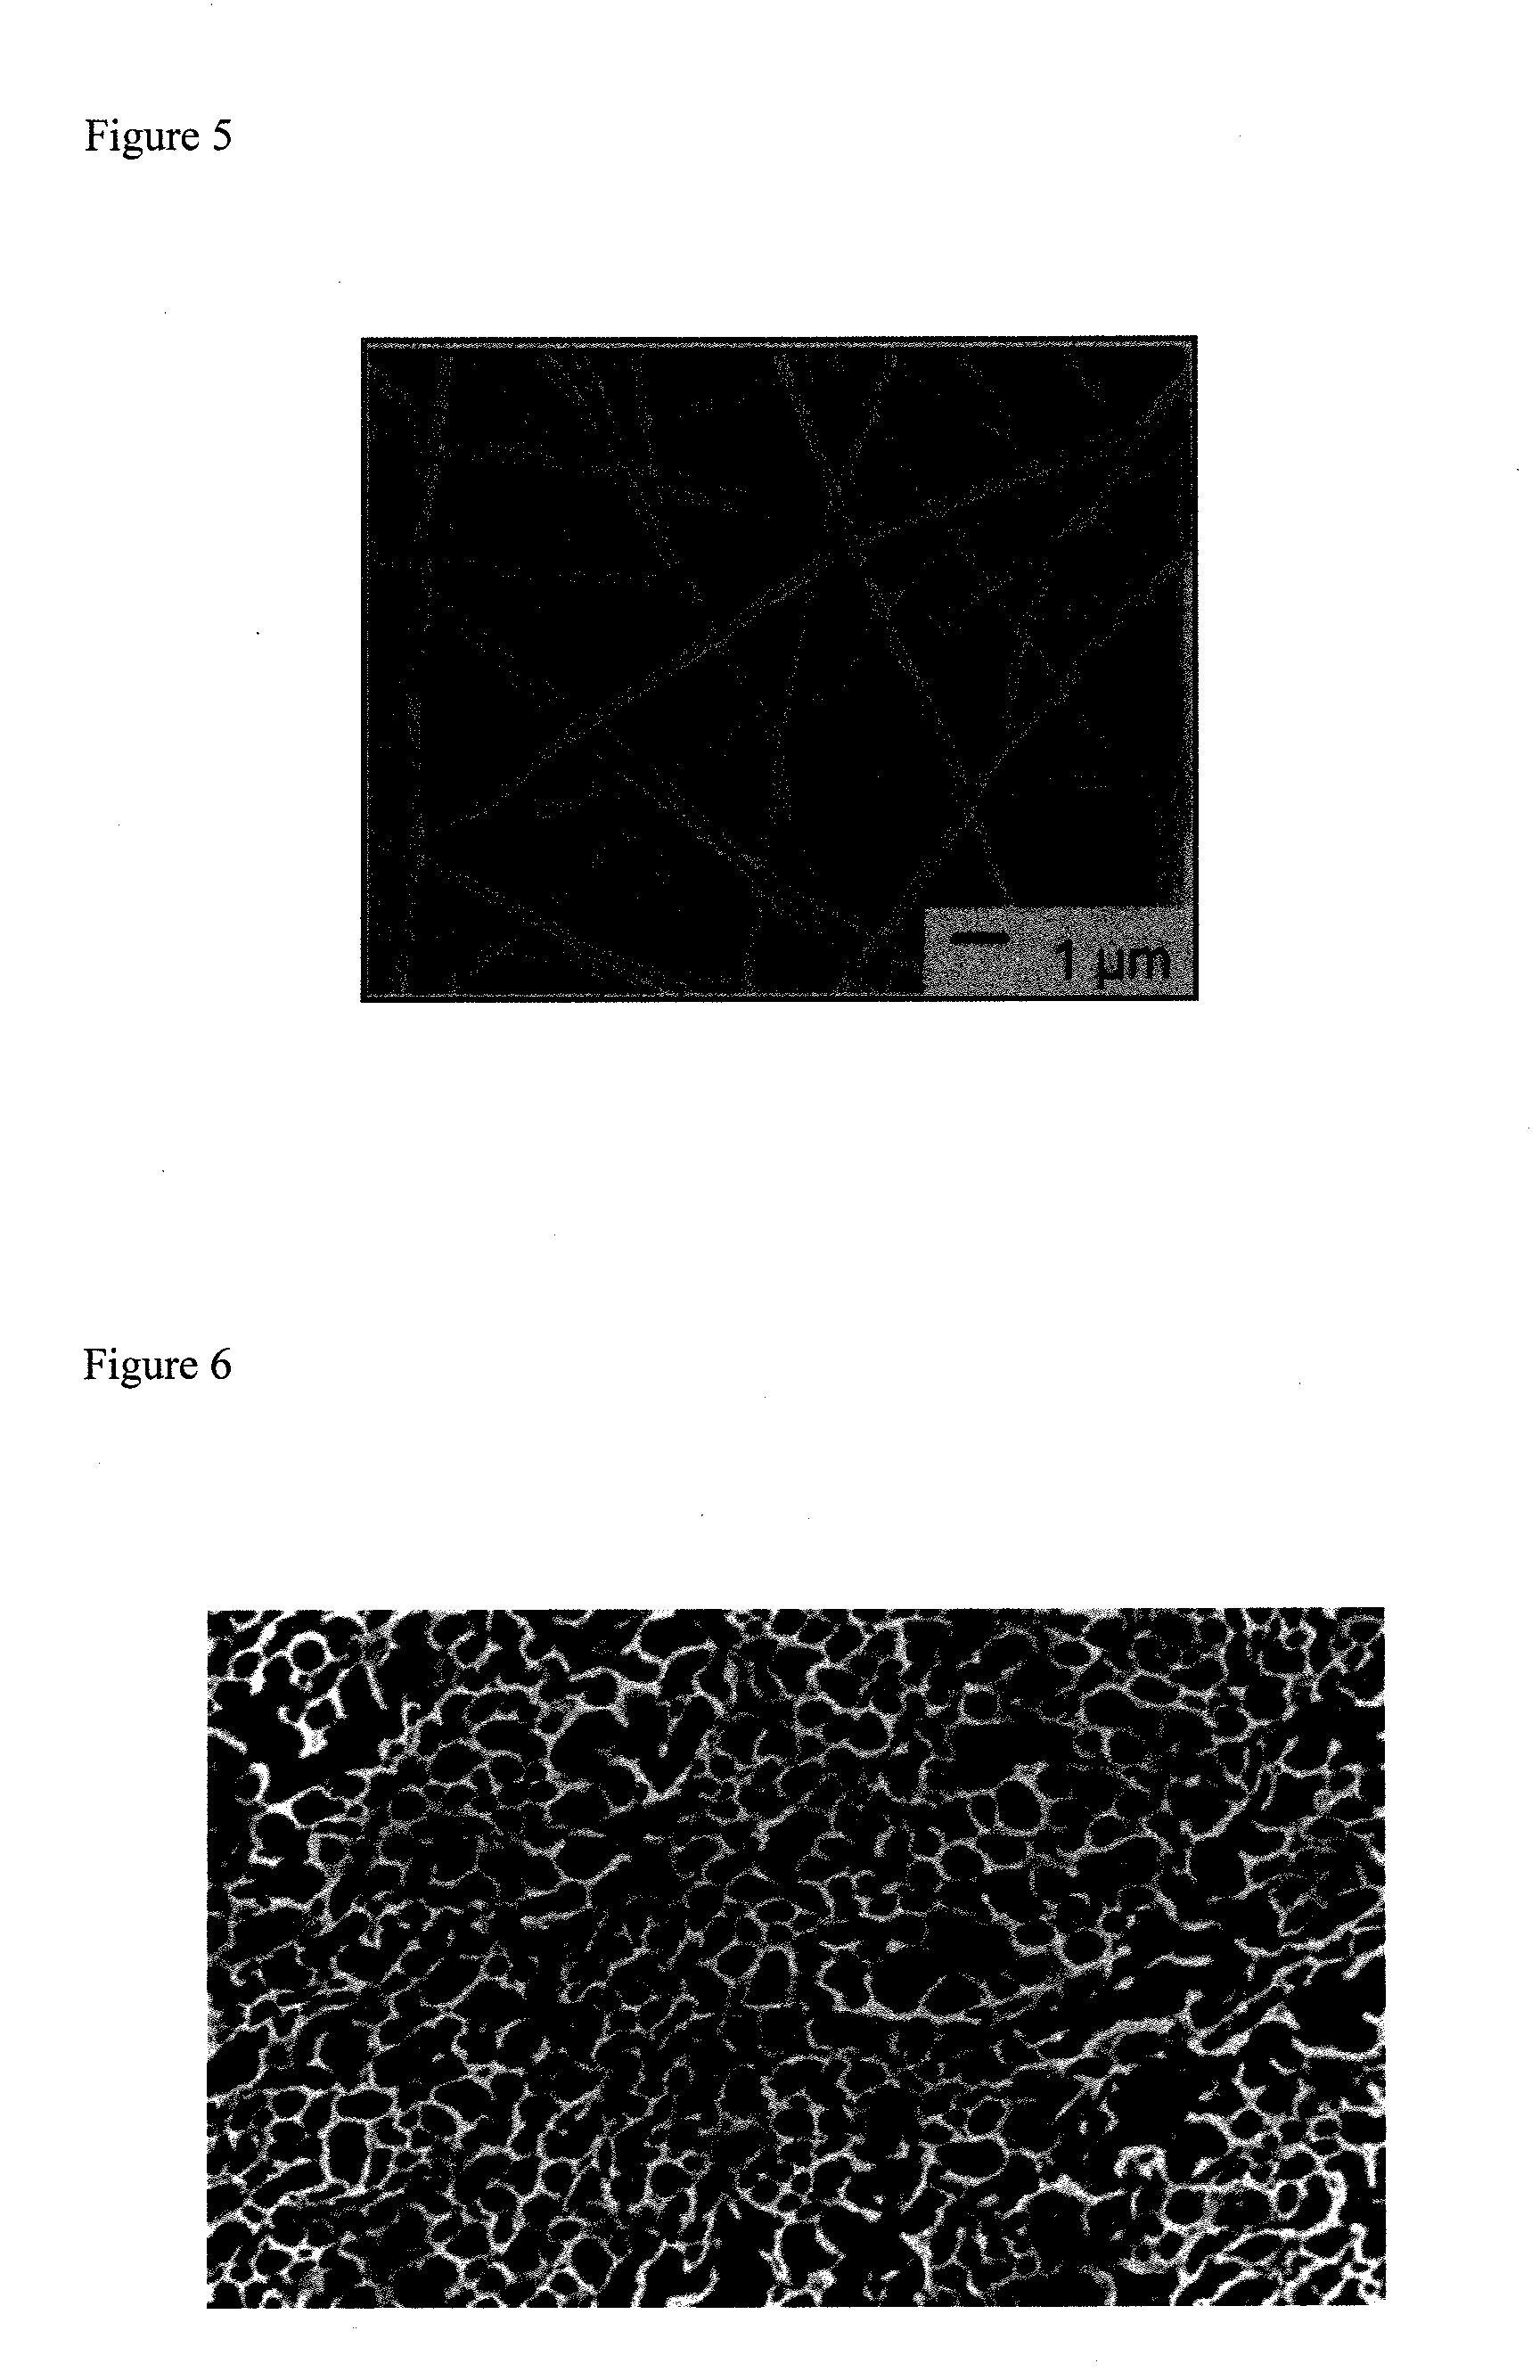 Nanofibrous scaffold comprising immobilized cells